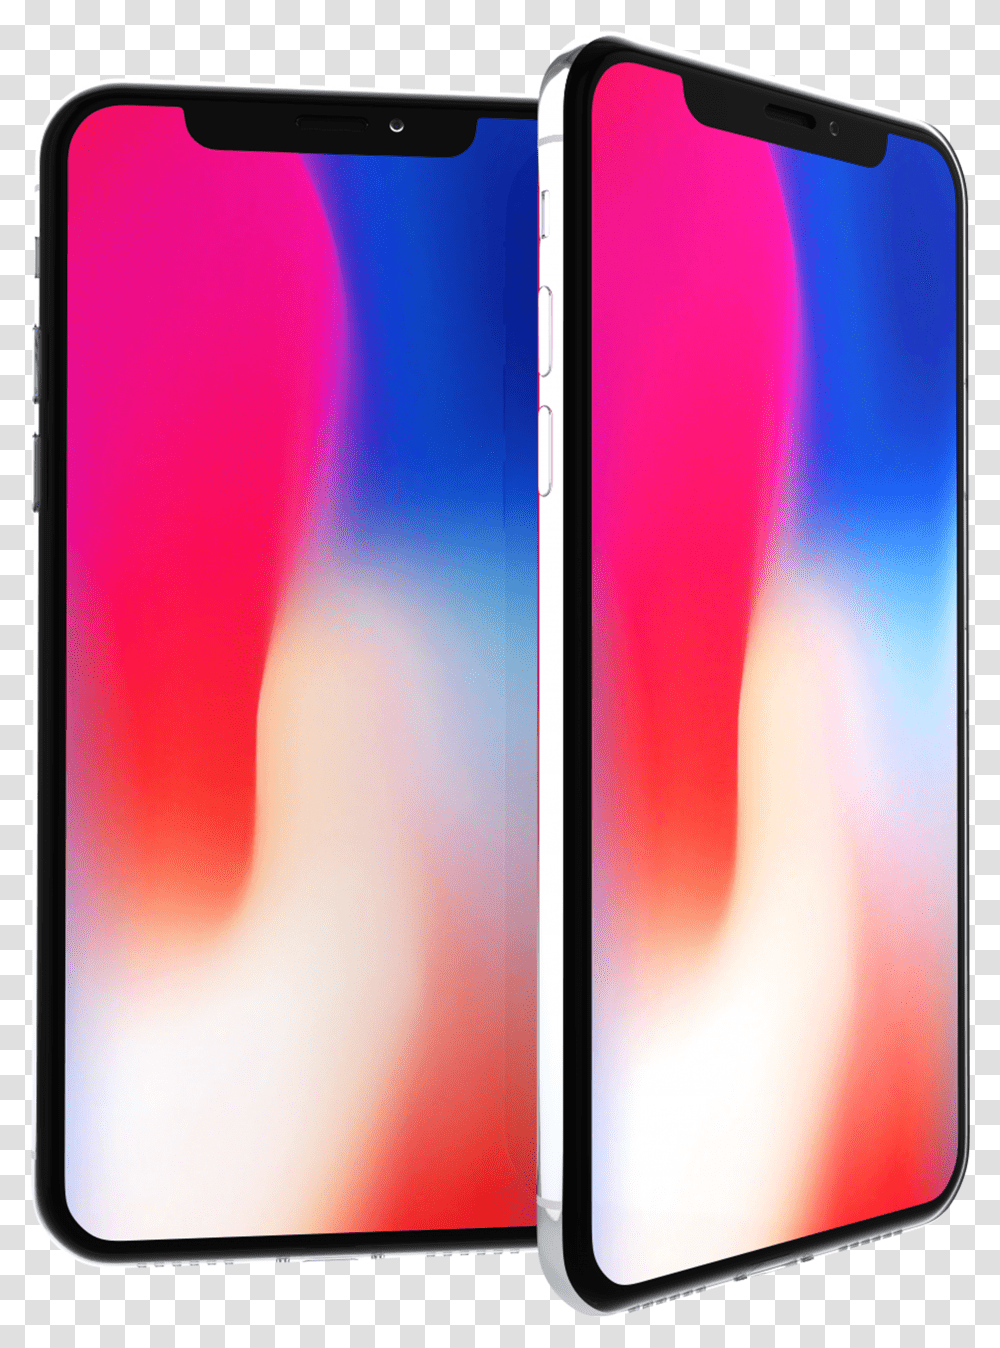 Apple Iphone X Image Free Iphone X Transparent Png